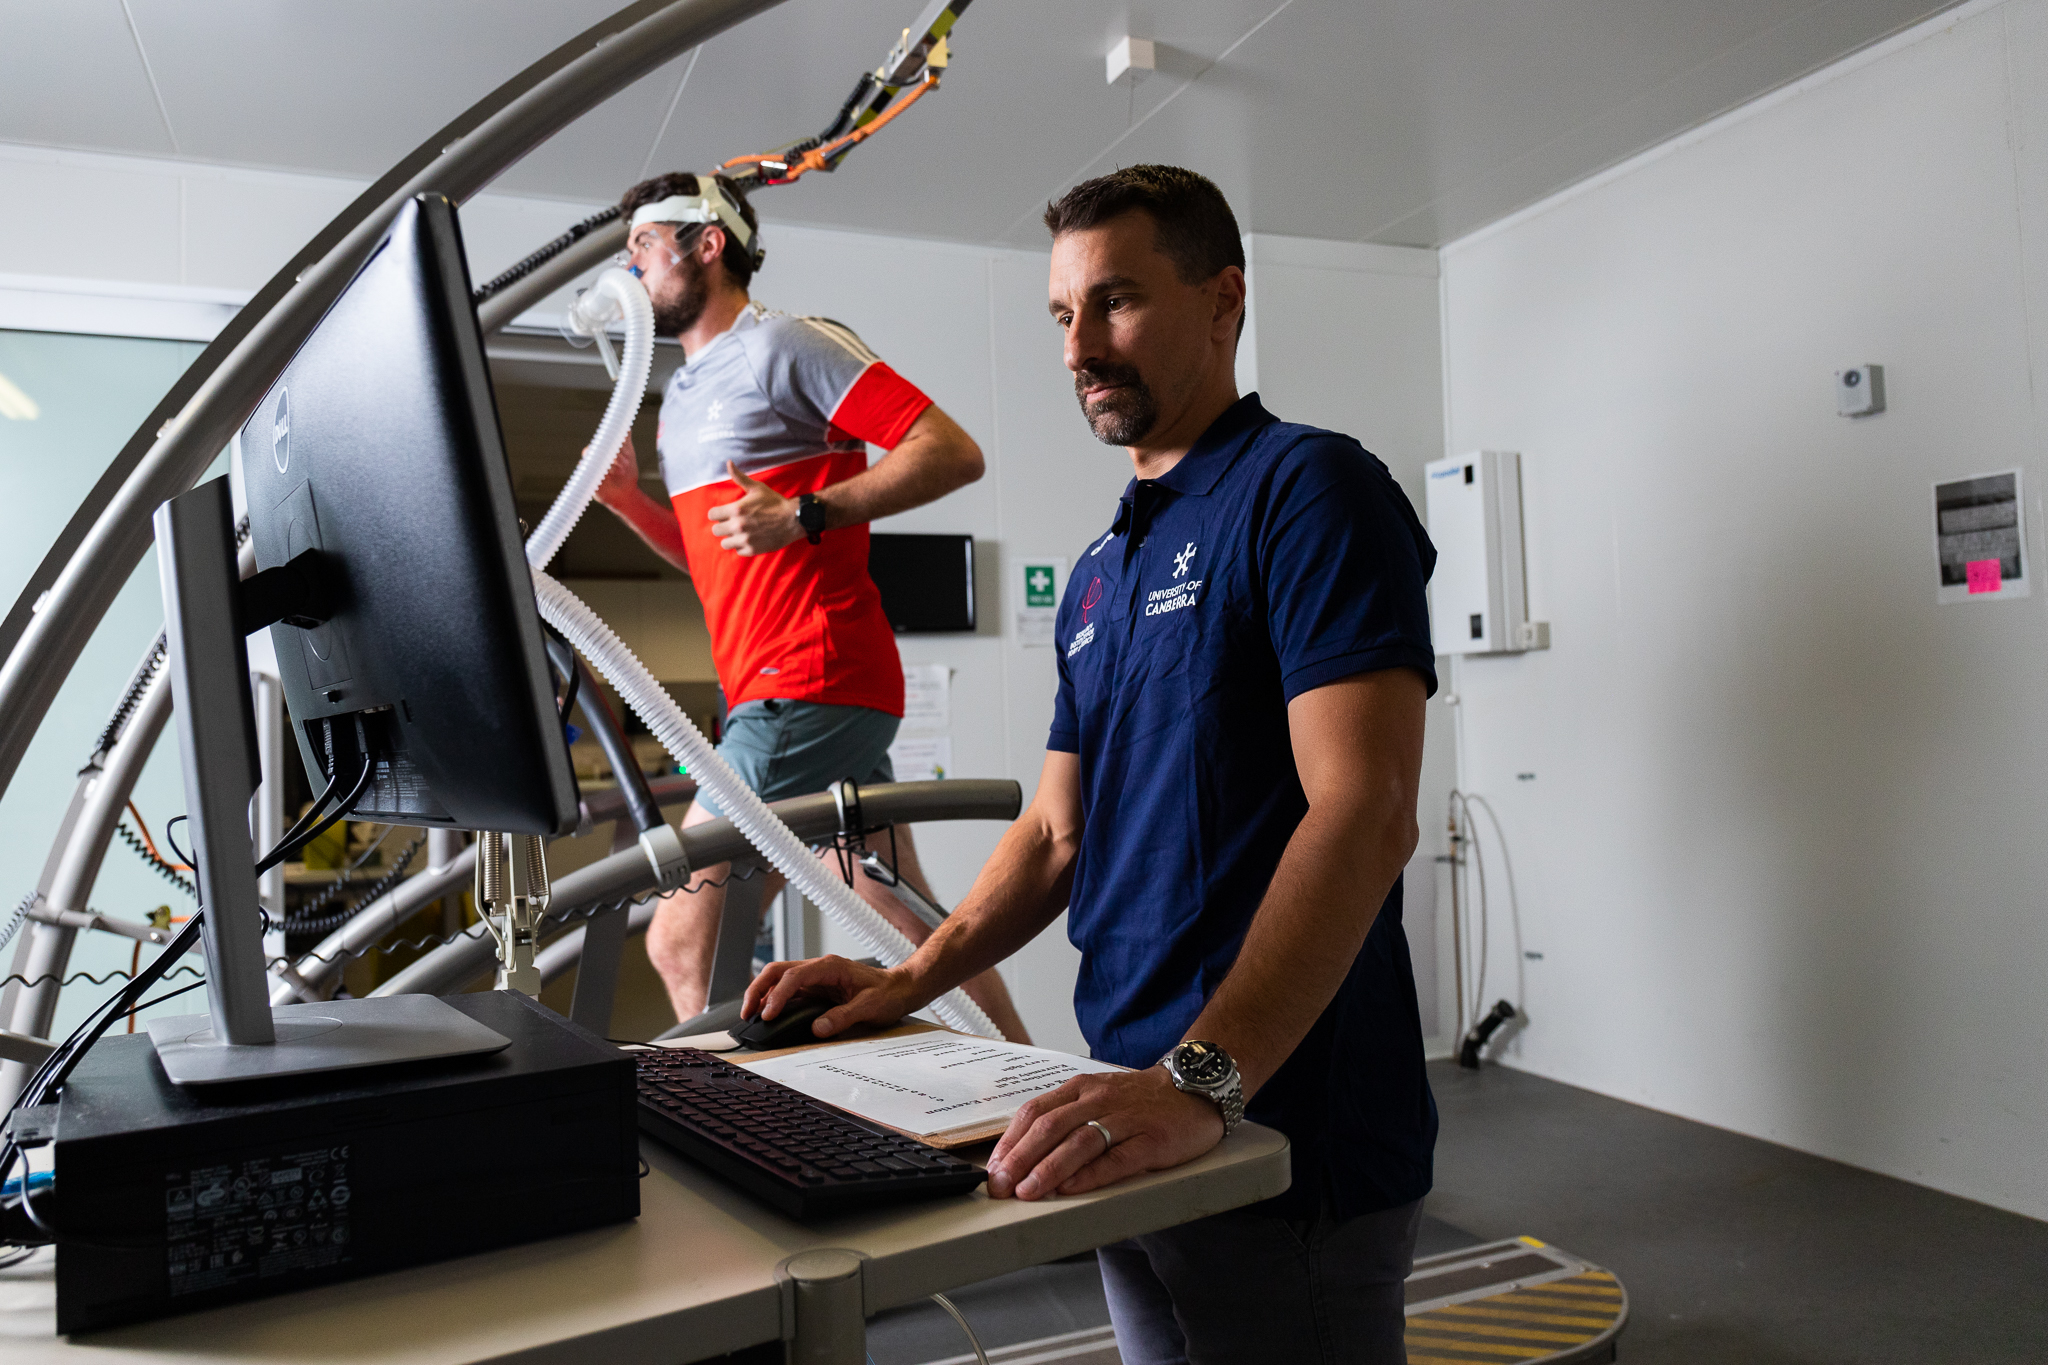 UCRISE undertaking research and testing with an athlete on a treadmill